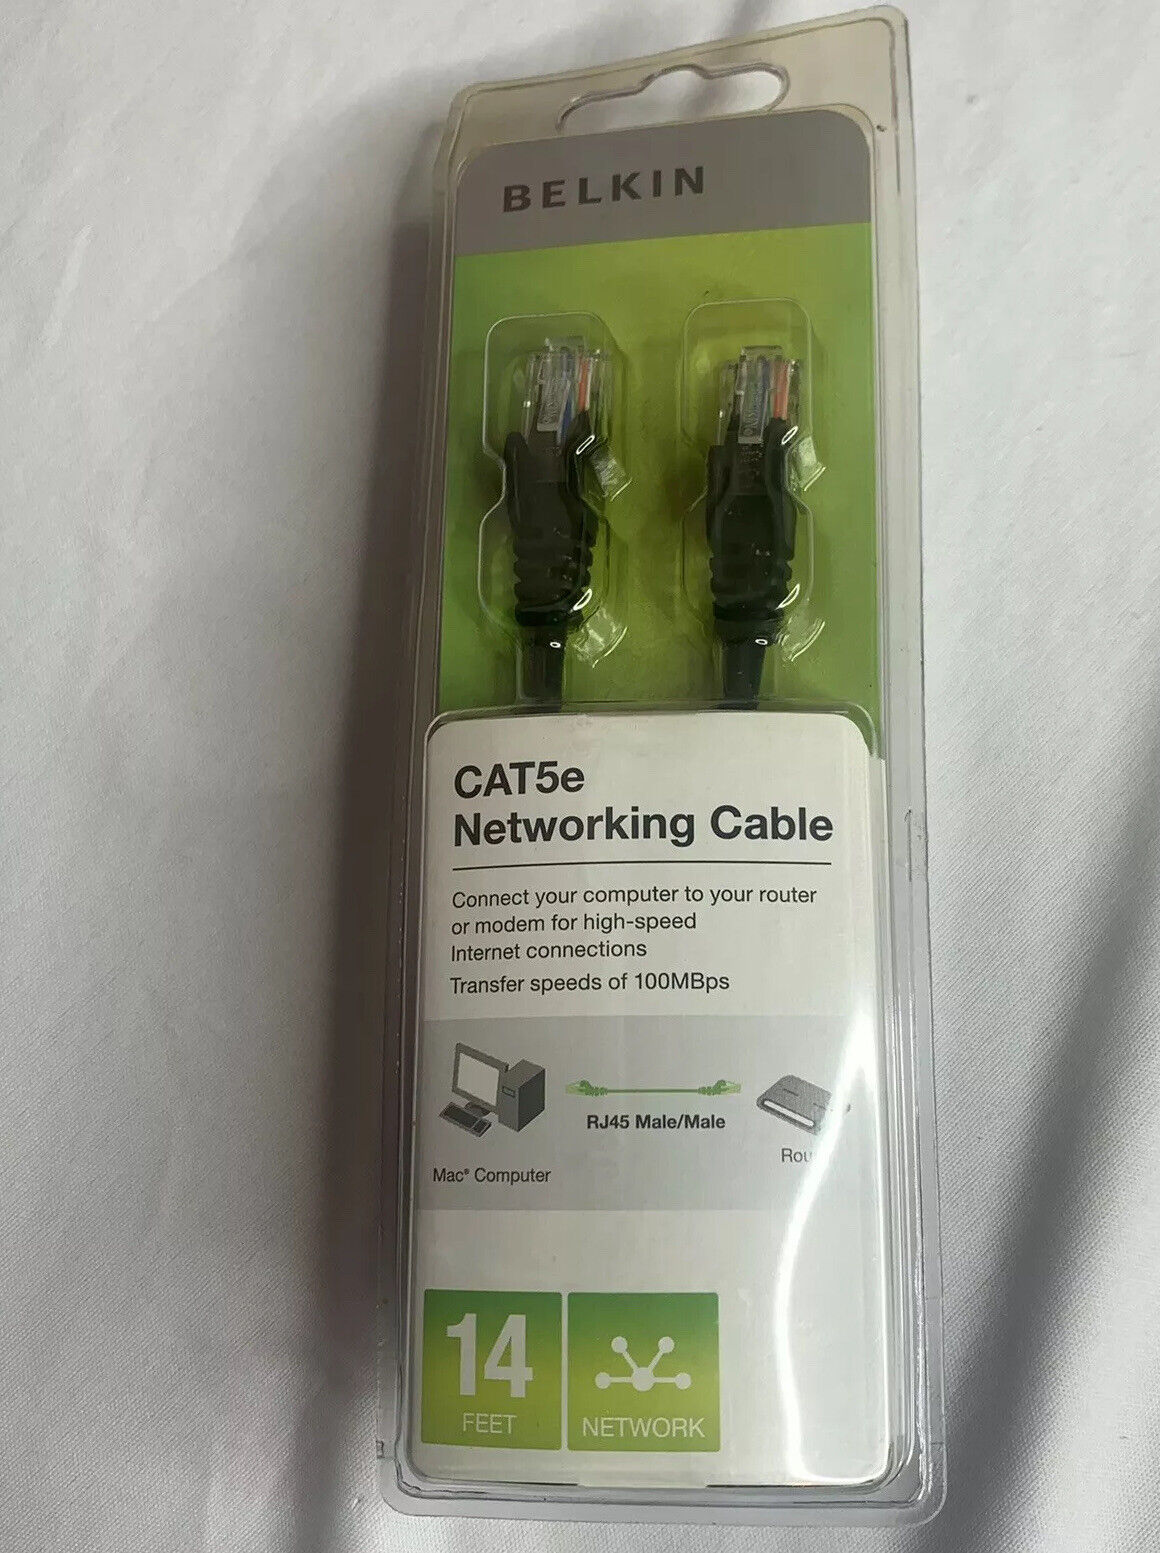 Belkin 14 Foot Cat 5e Networking Cable , Unopened Package But Dented. RJ45